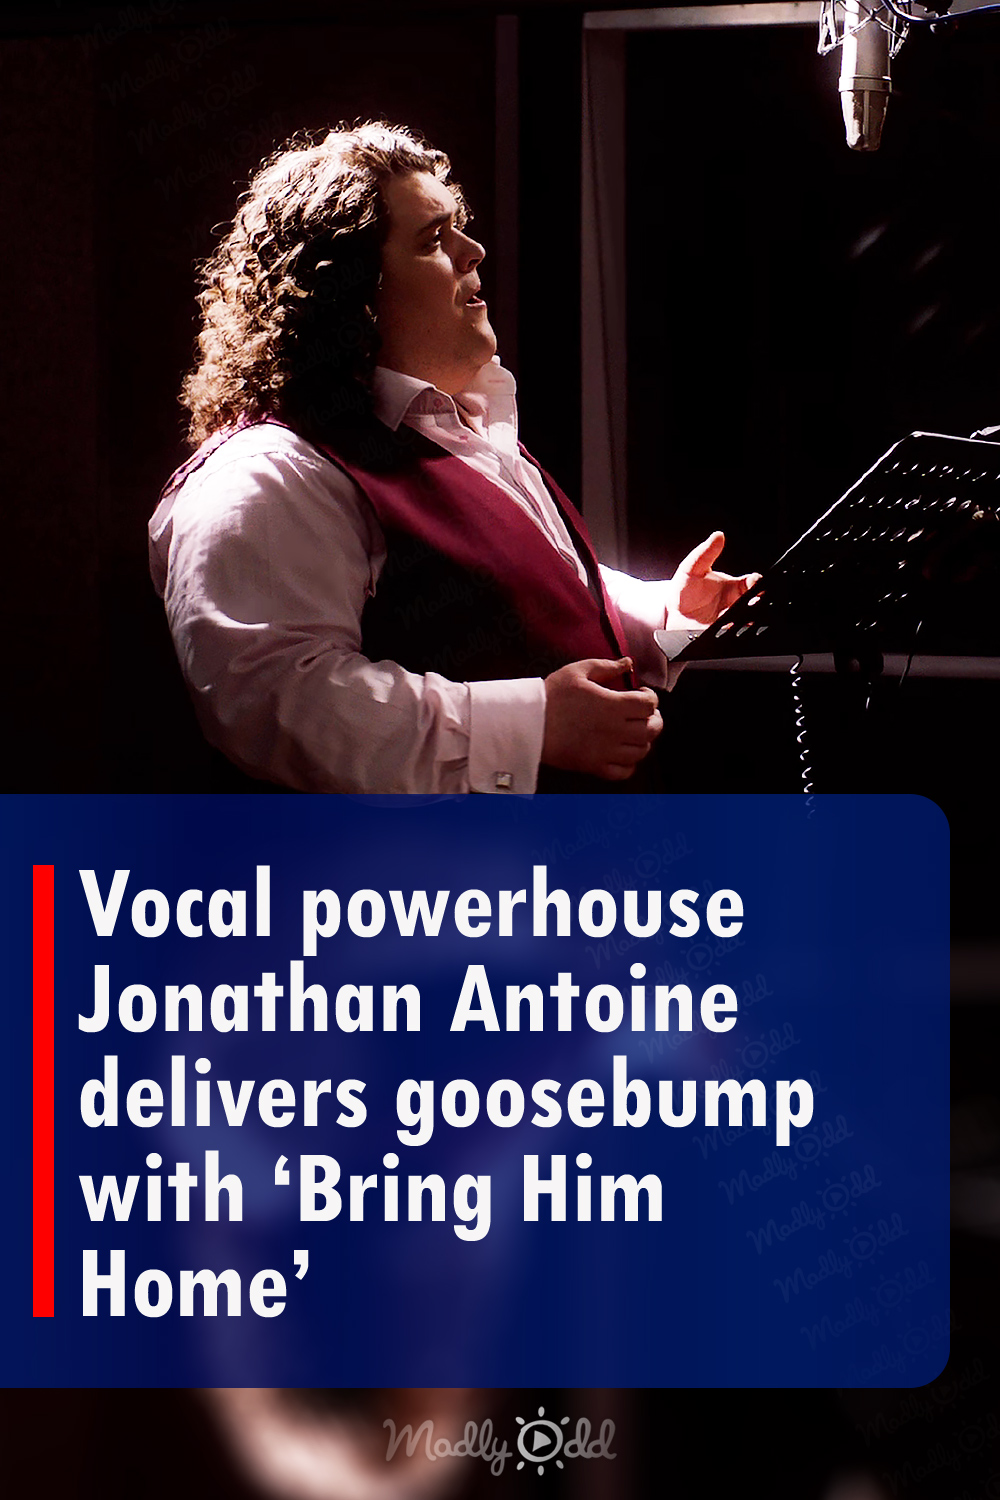 Vocal powerhouse Jonathan Antoine delivers goosebump with ‘Bring Him Home’